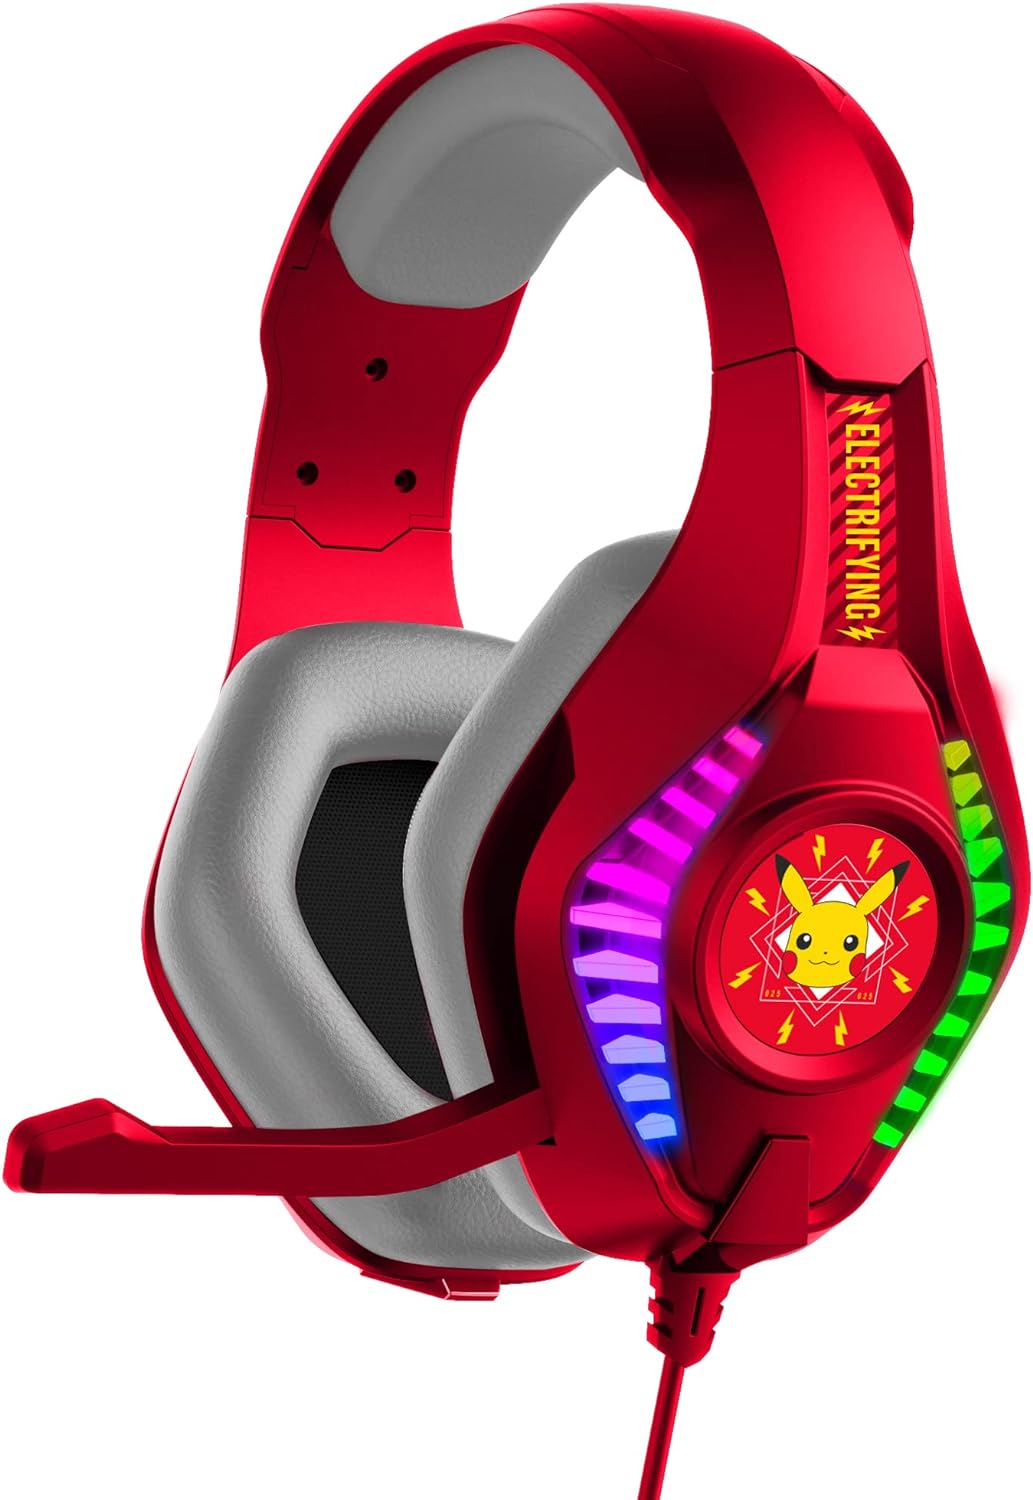 OTL Pikachu Pro G5 Gaming Headphone| Over-Ear Wired Stereo Gamer Headphone w/RGB LED Effect, Retractable Microphone, works with XBox, PS5/PS4, 2Ds XL, Nintendo Switch, iPads & Tablets w/ 3.5mm Port